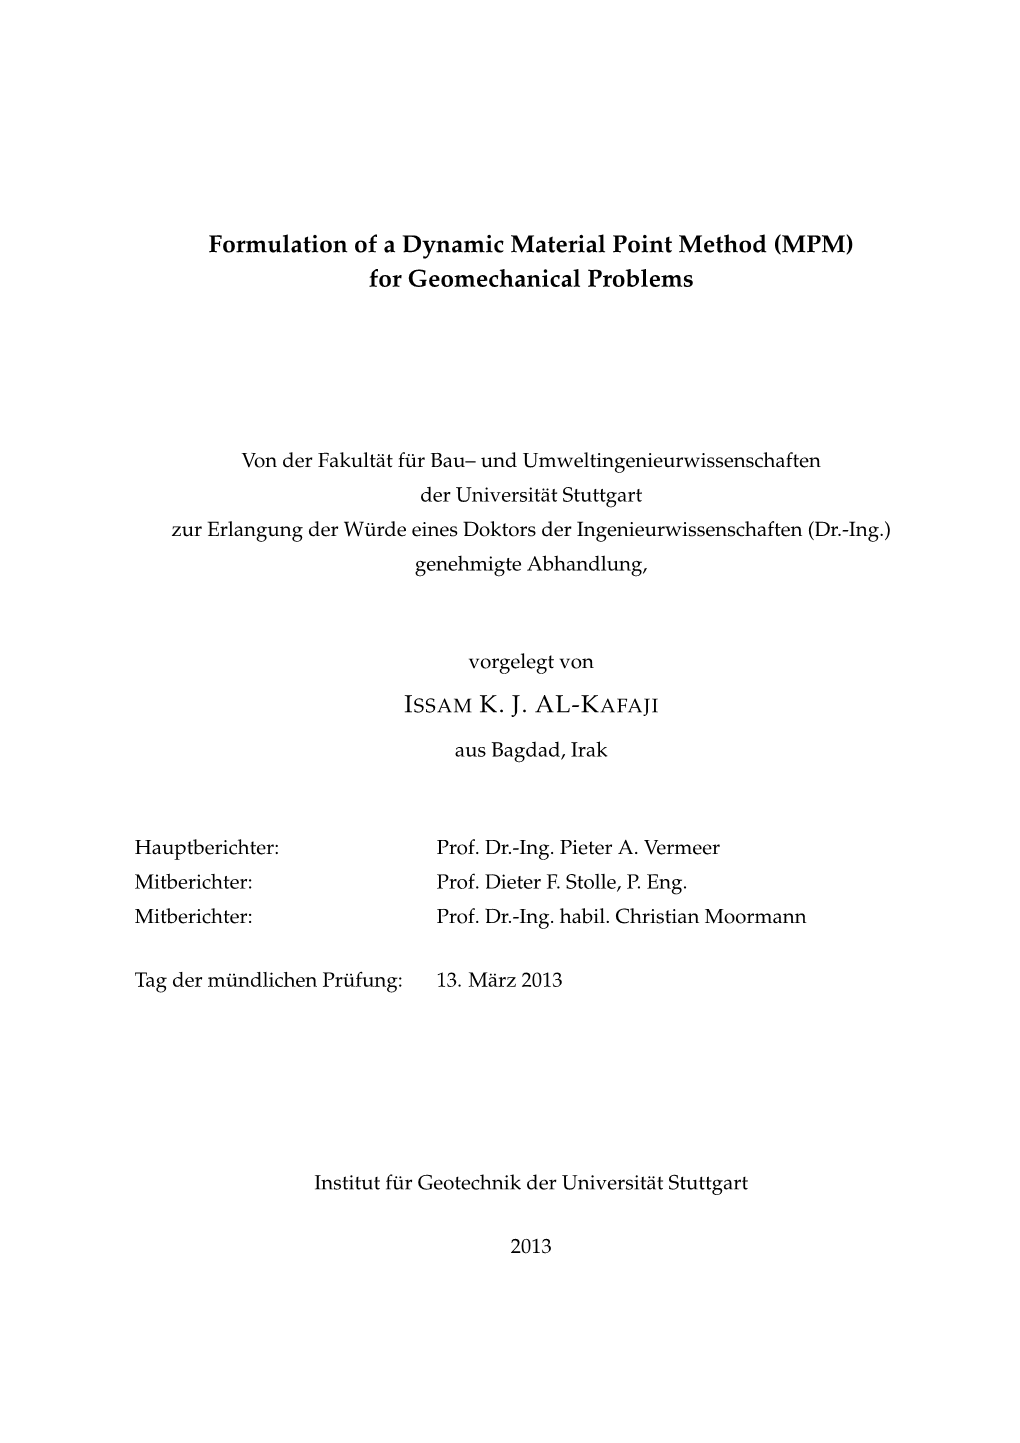 Formulation of a Dynamic Material Point Method (MPM) for Geomechanical Problems